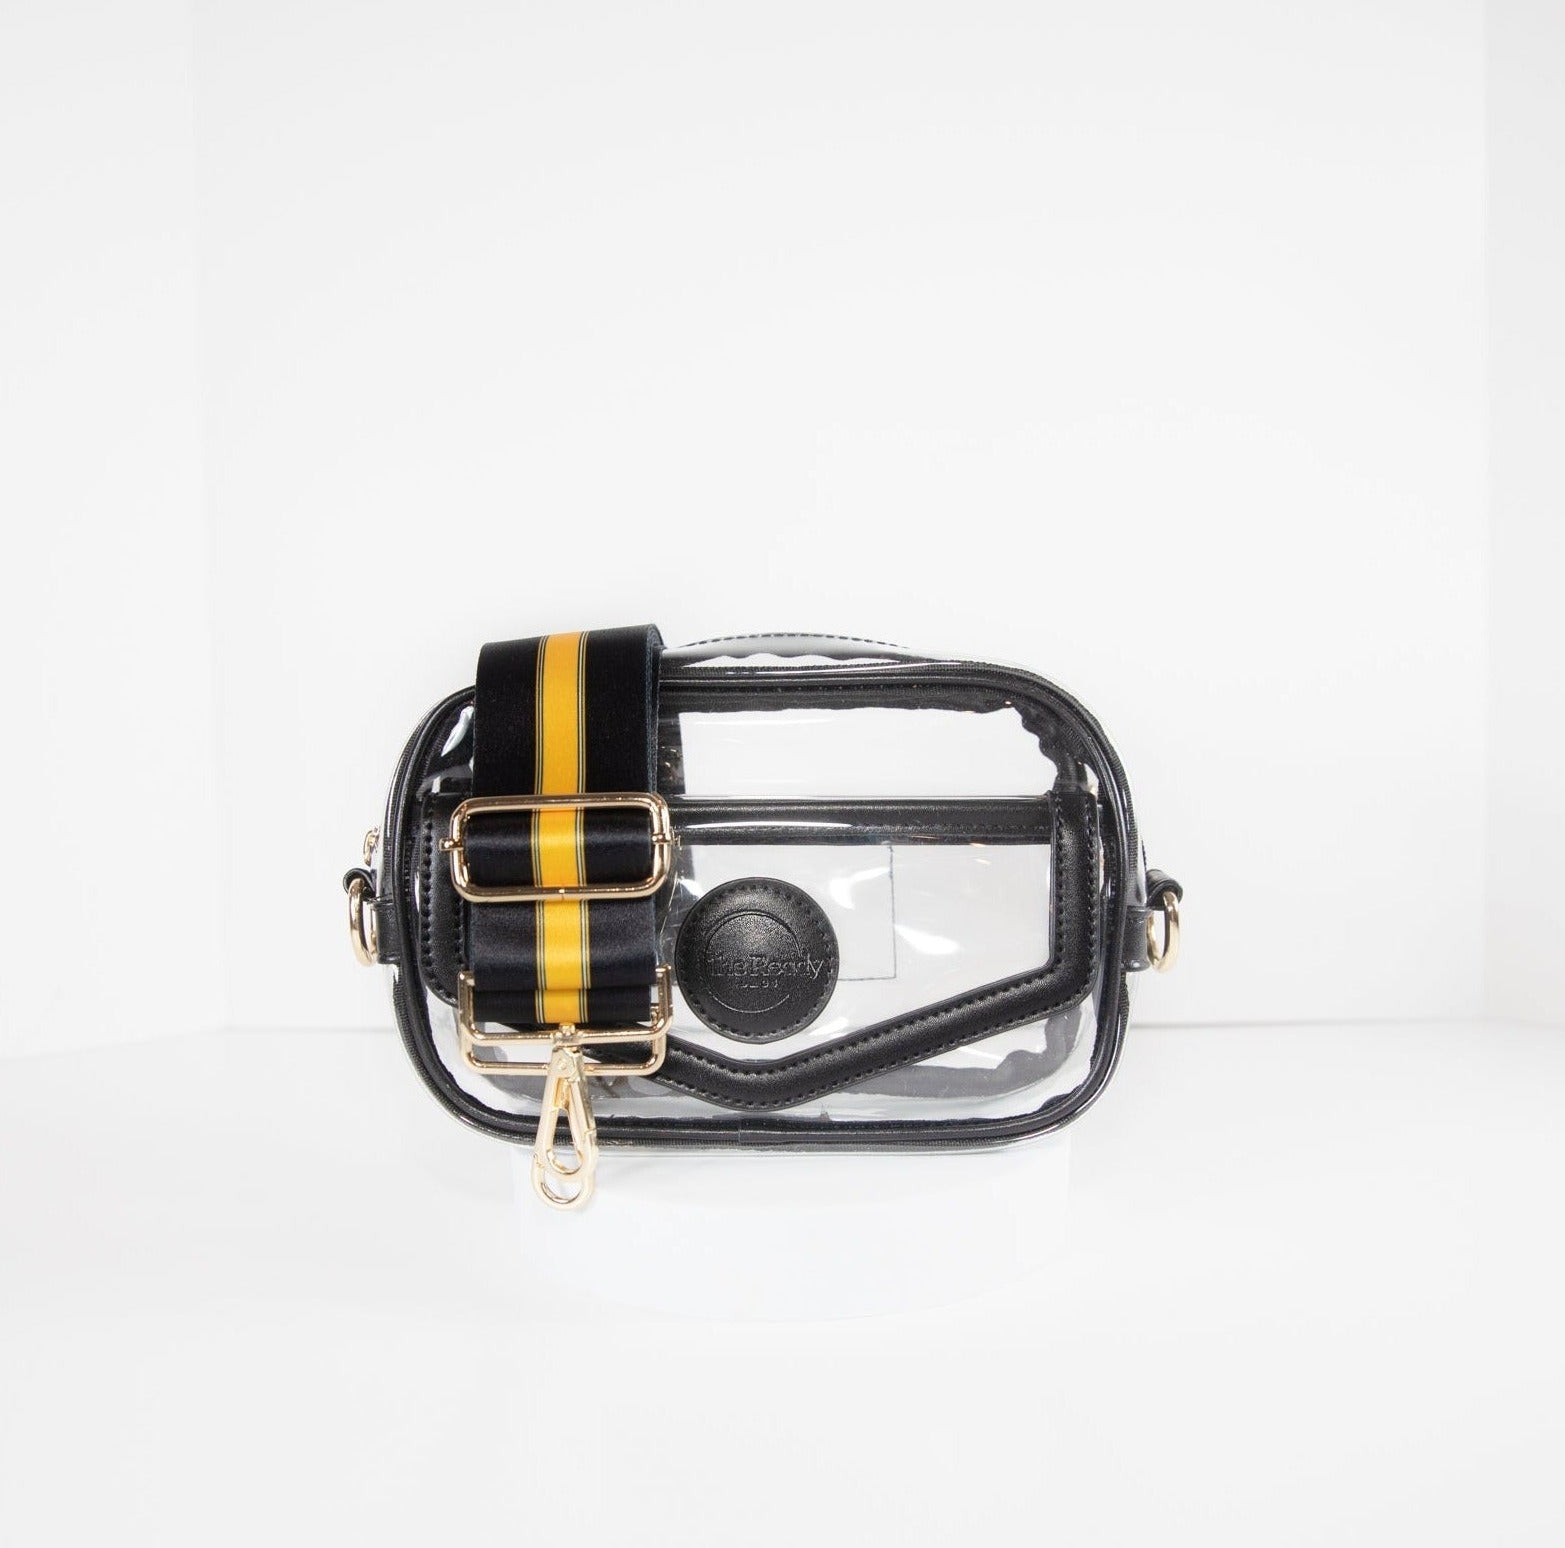 Clear stadium bag in black leather trim, front facing, with a crossbody strap in Pittsburgh Steeler black and gold.